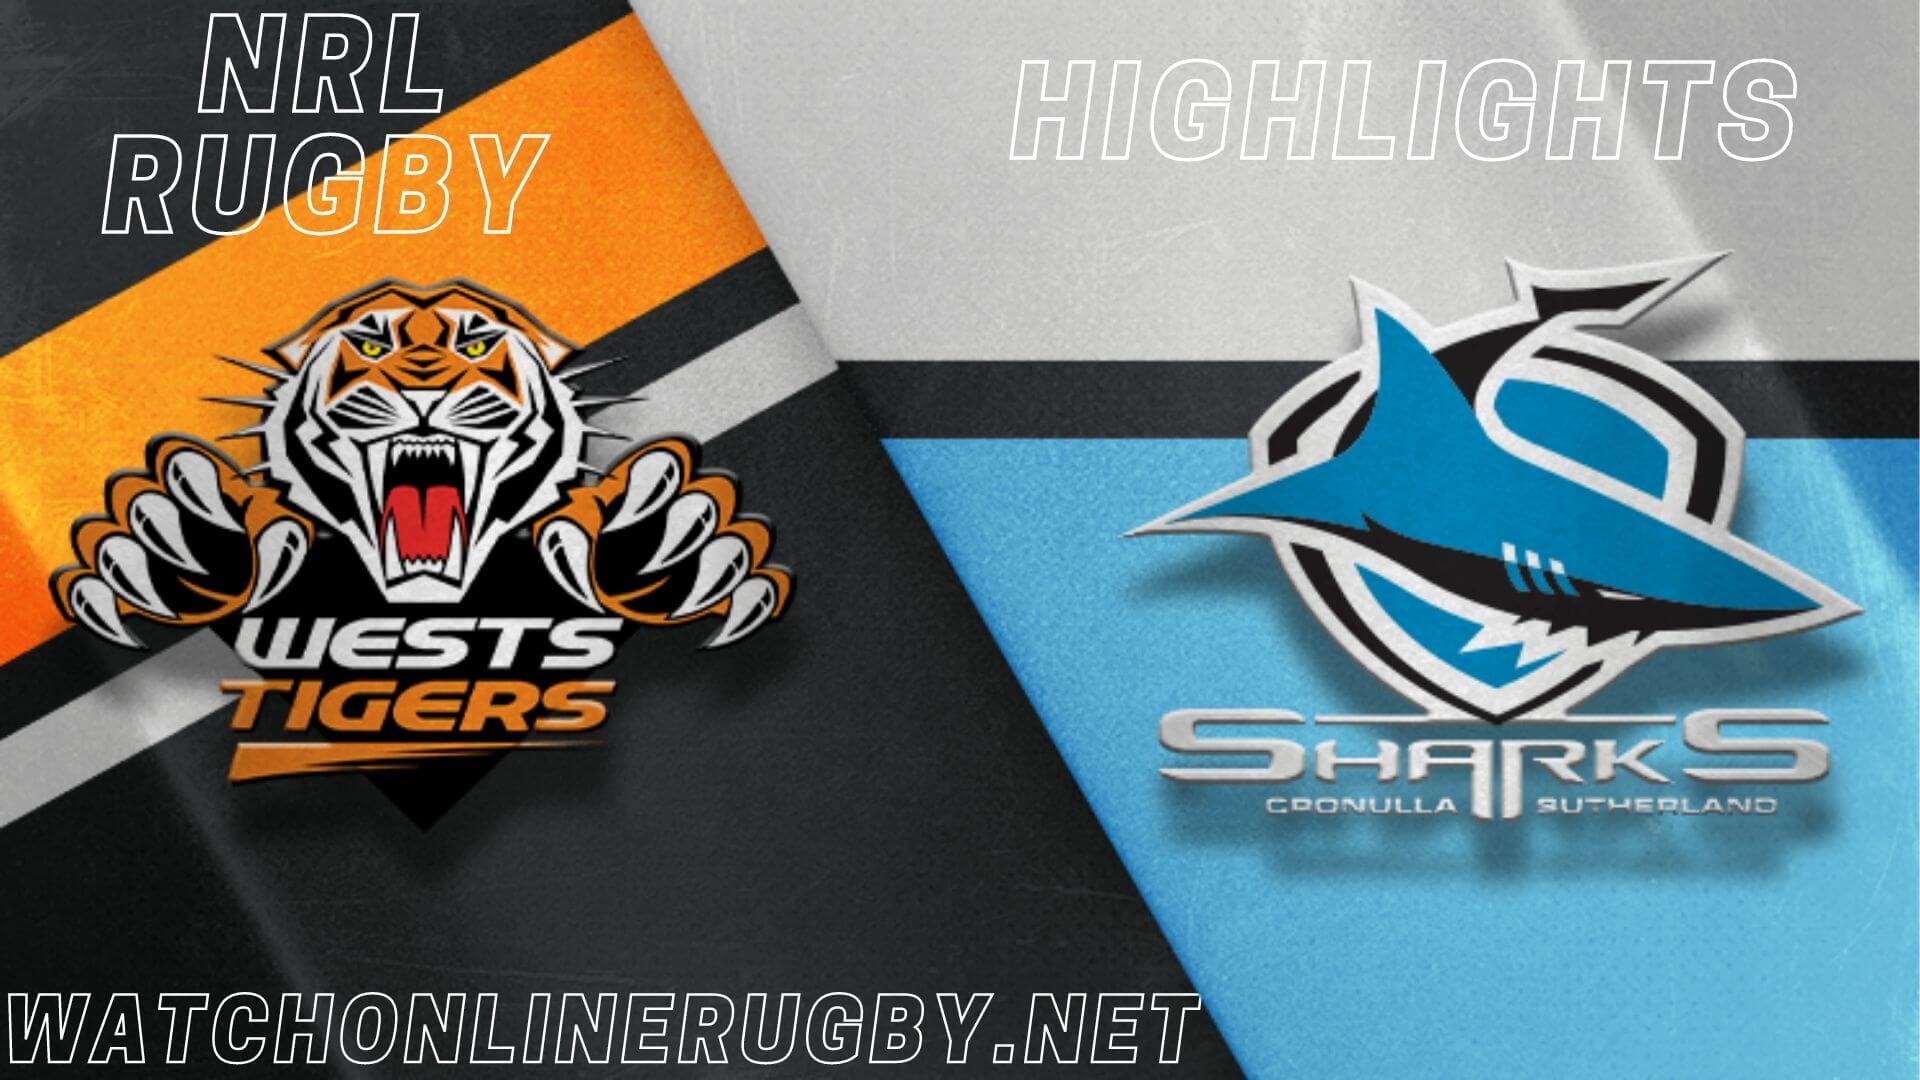 Sharks Vs Wests Tigers Highlights RD 5 NRL Rugby